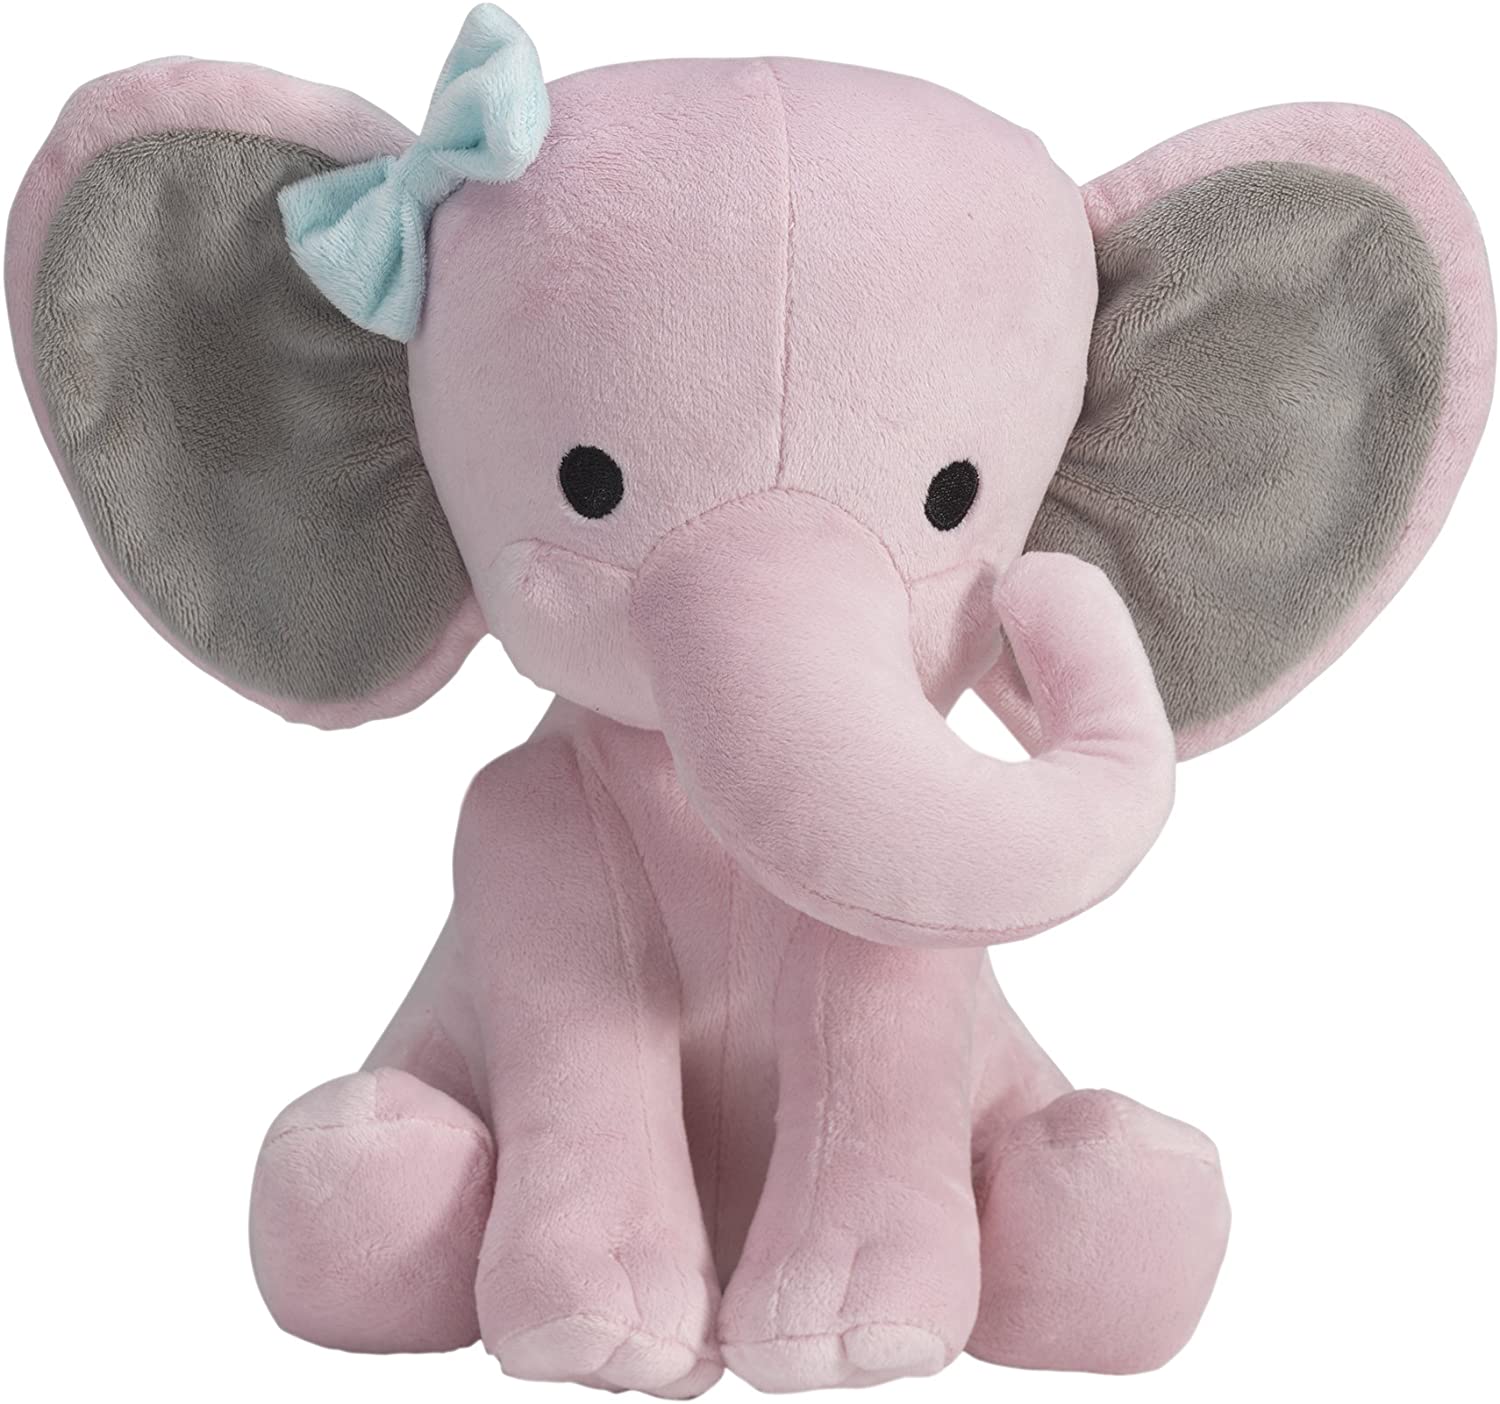 Bedtime Originals Twinkle Toes Pink Elephant Plush (Hazel) $4.30 + Free Shipping w/ Amazon Prime or Orders $25+